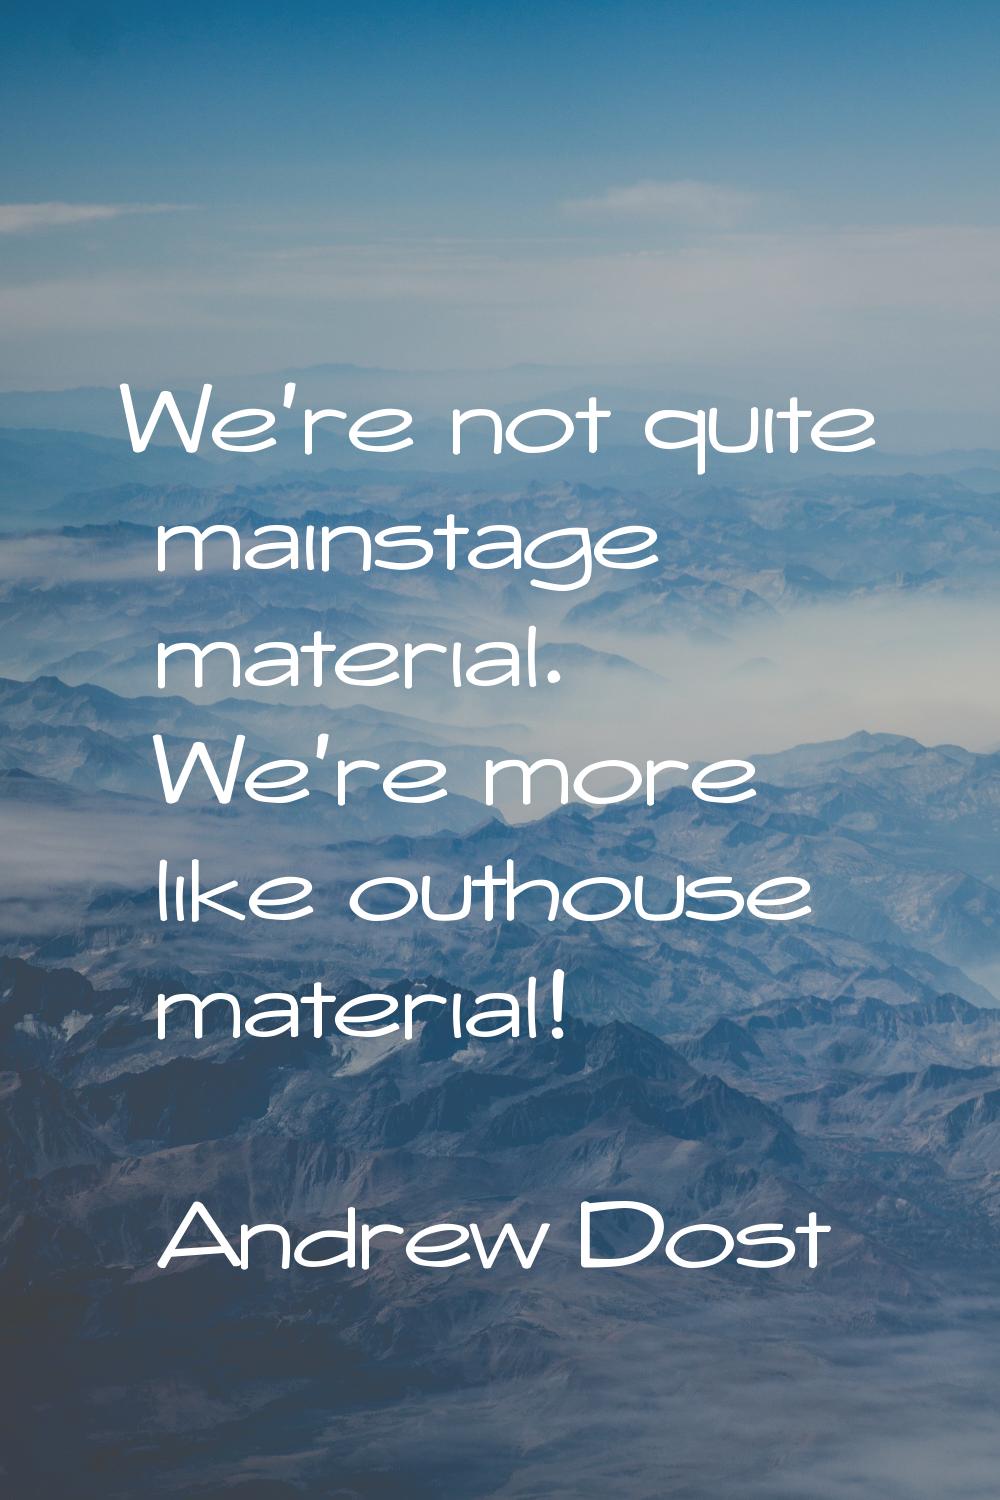 We're not quite mainstage material. We're more like outhouse material!